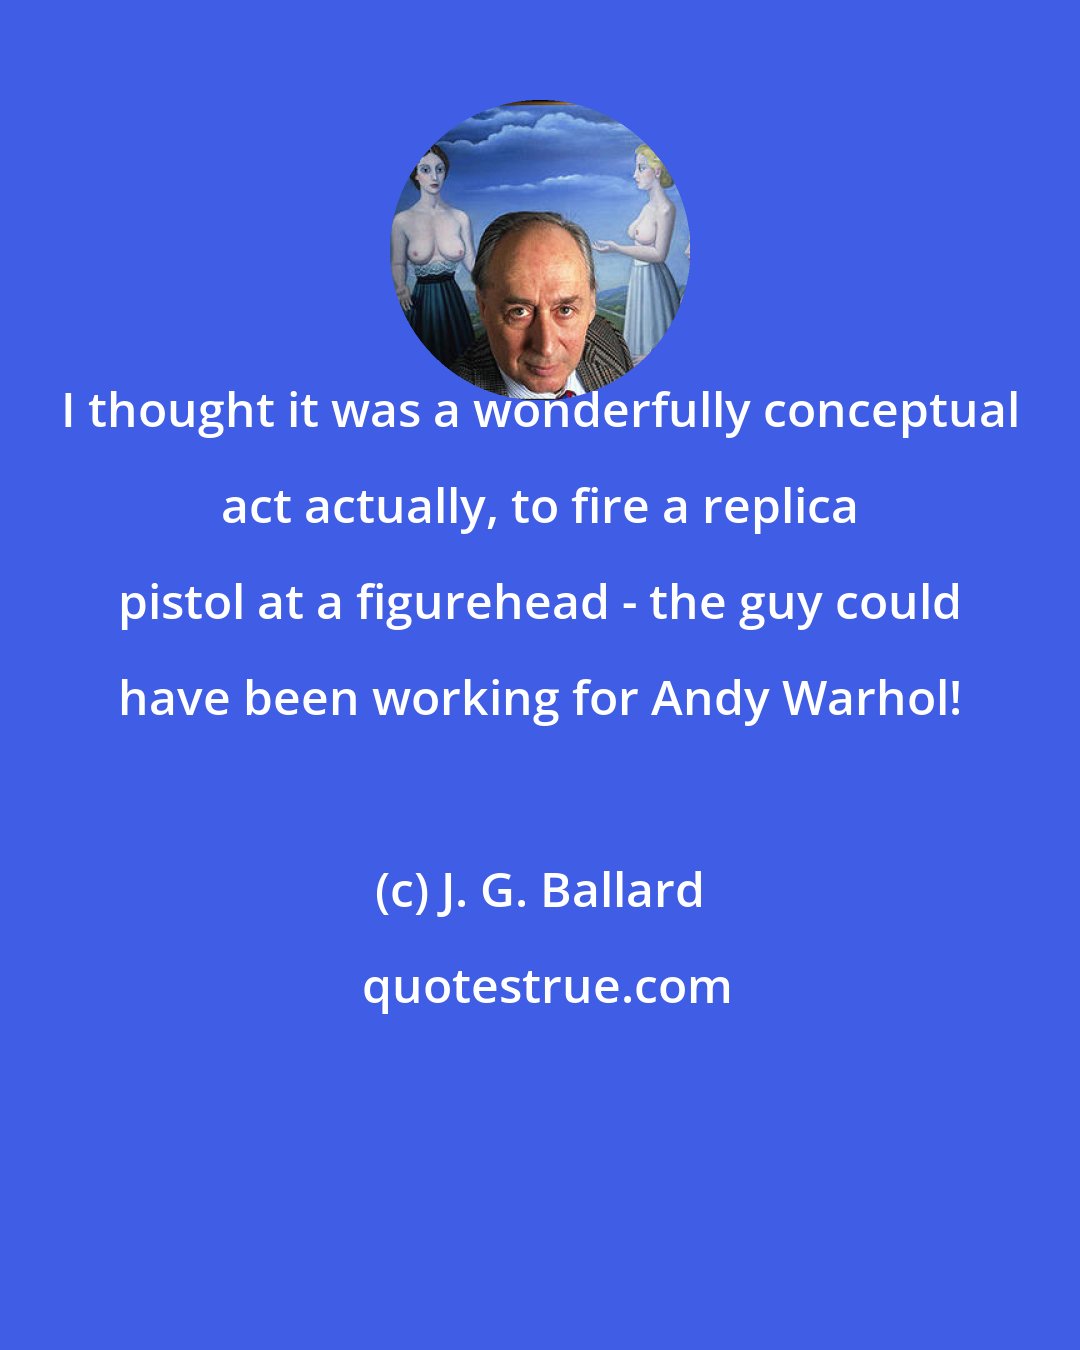 J. G. Ballard: I thought it was a wonderfully conceptual act actually, to fire a replica pistol at a figurehead - the guy could have been working for Andy Warhol!